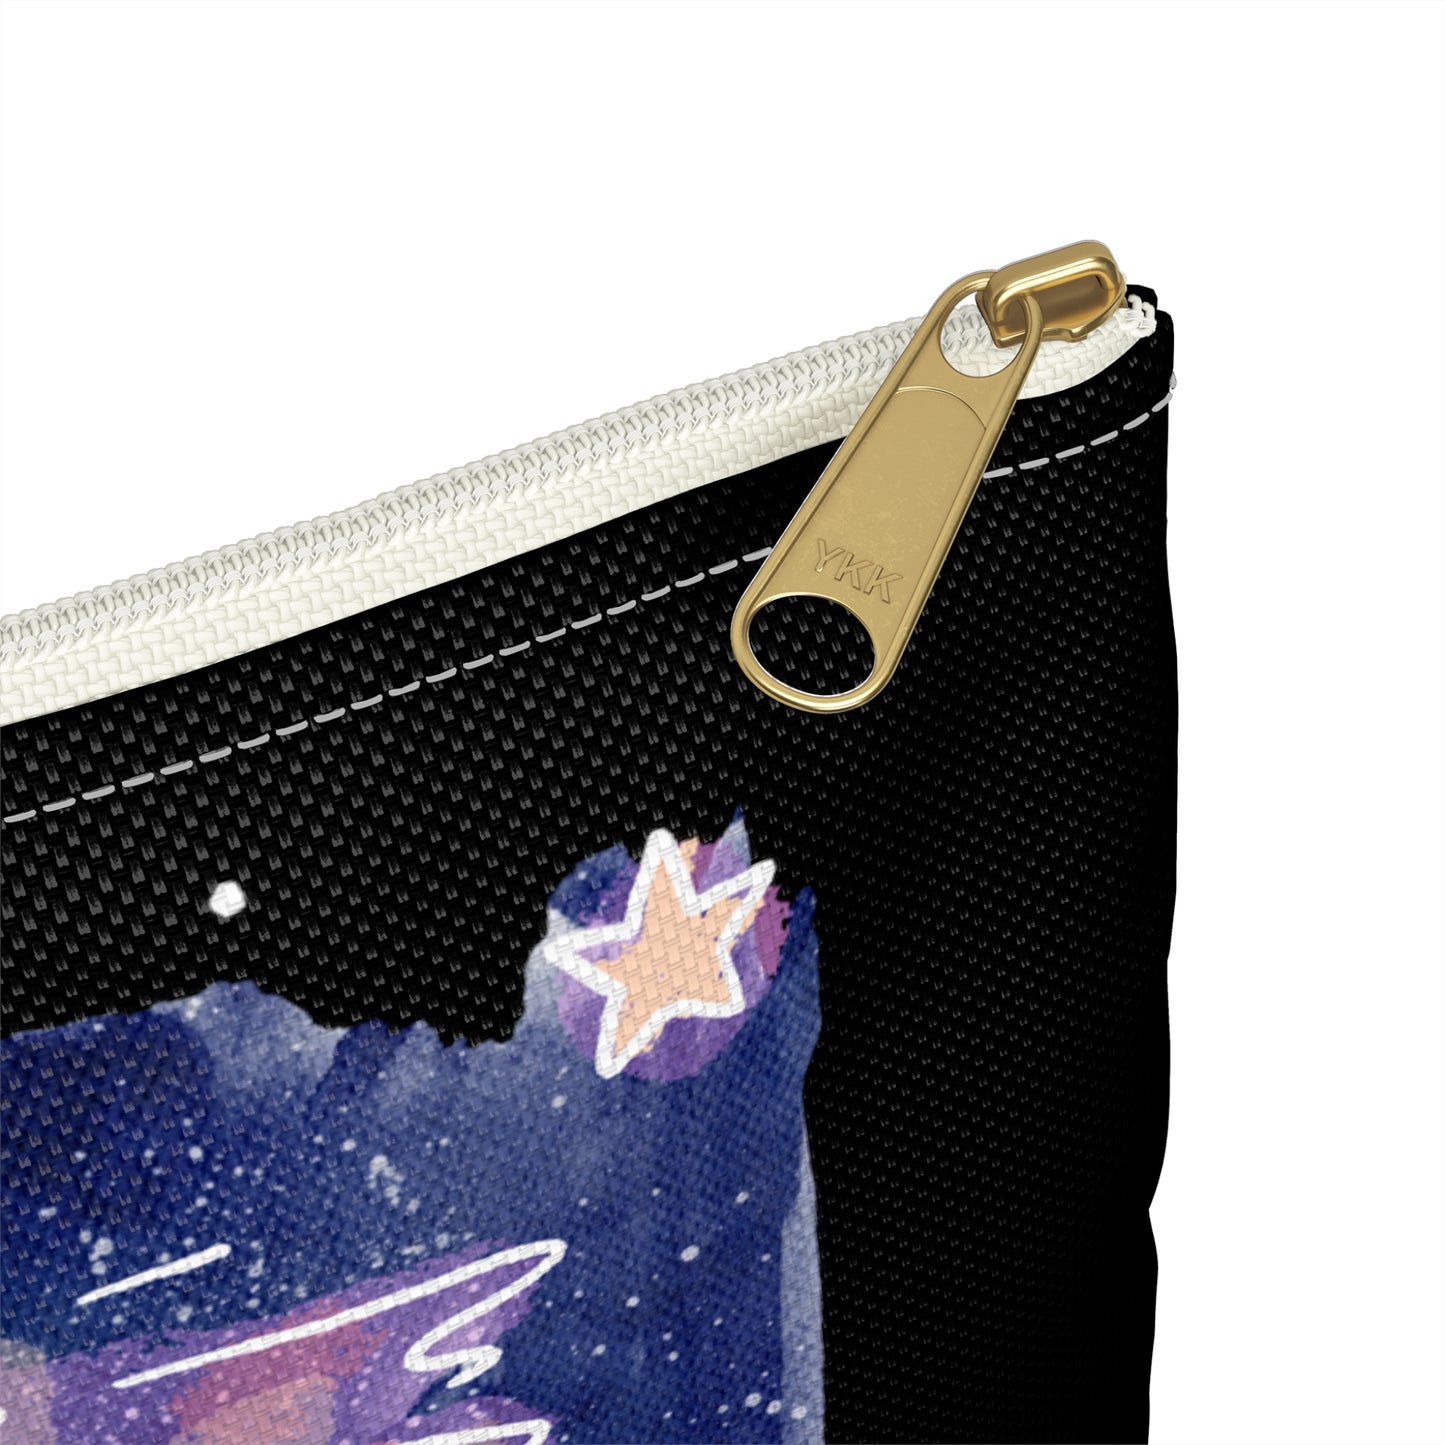 Cats in Space Accessory Pouch